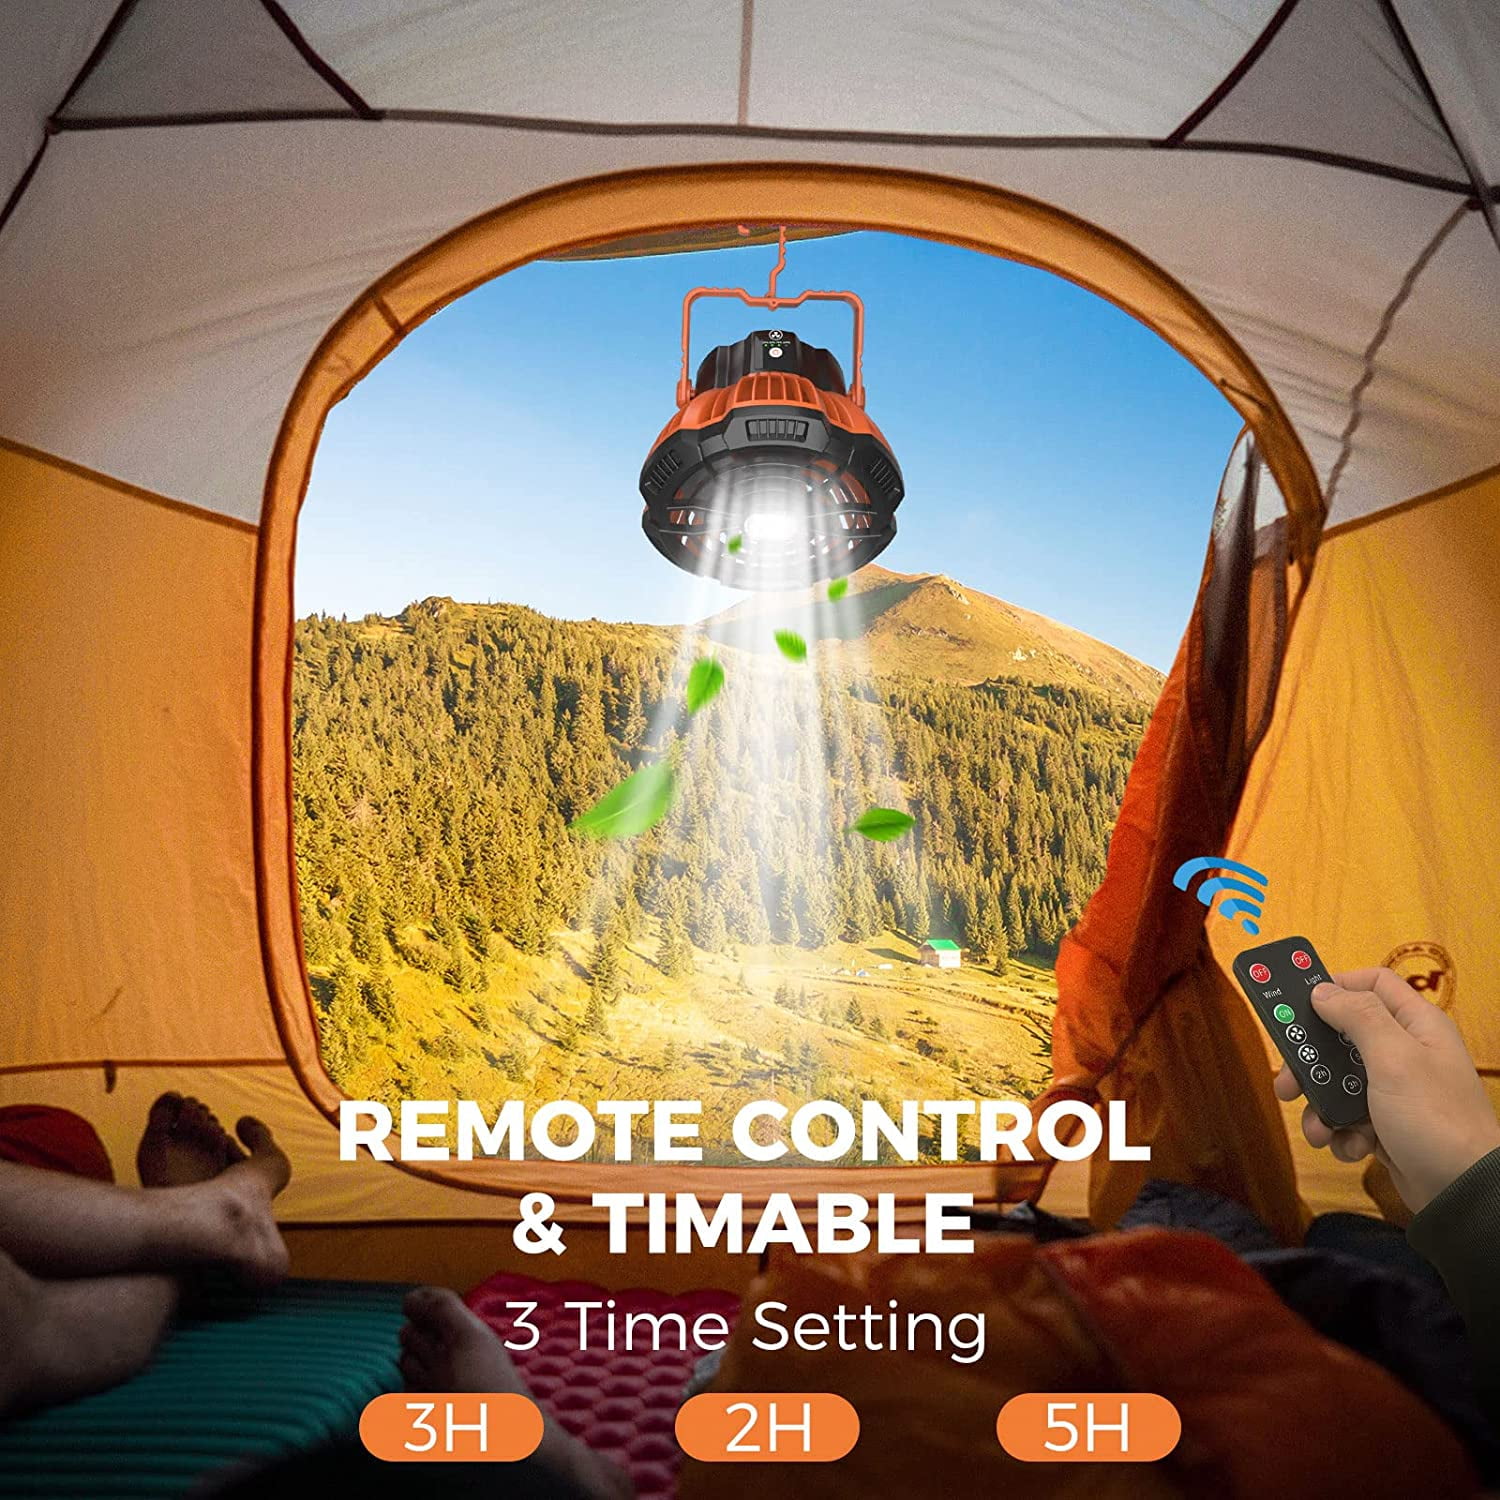 Camping Fan for Tents,Tent Fan with Lantern Remote Control 7800mAh Portable USB Rechargeable Battery Operated Desk Fan Power Bank Up to 25 Hours for Travel,Fishing,Hiking,BBQ,Hurrican Camp Fan Light 